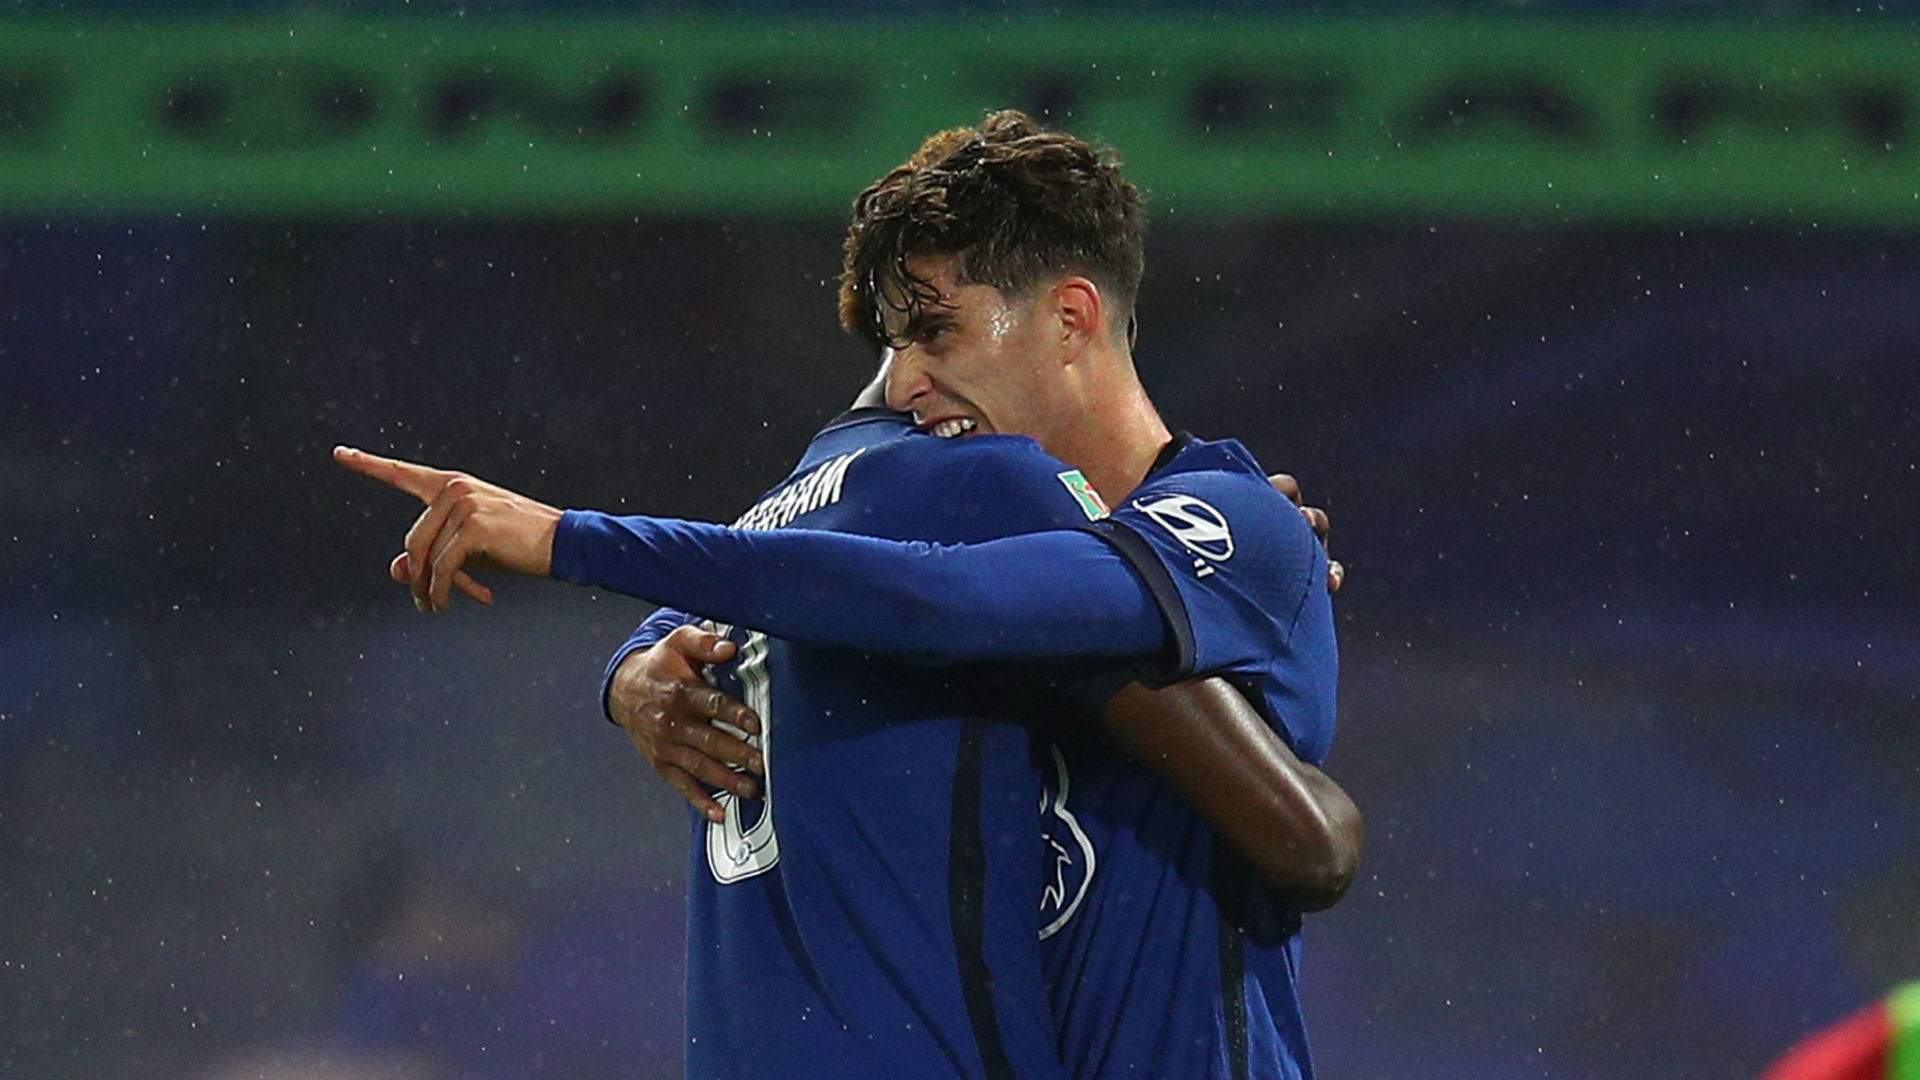 Kai Havertz got up and running at Chelsea with a hat-trick against Barnsley, and Frank Lampard has promised there is more to come.